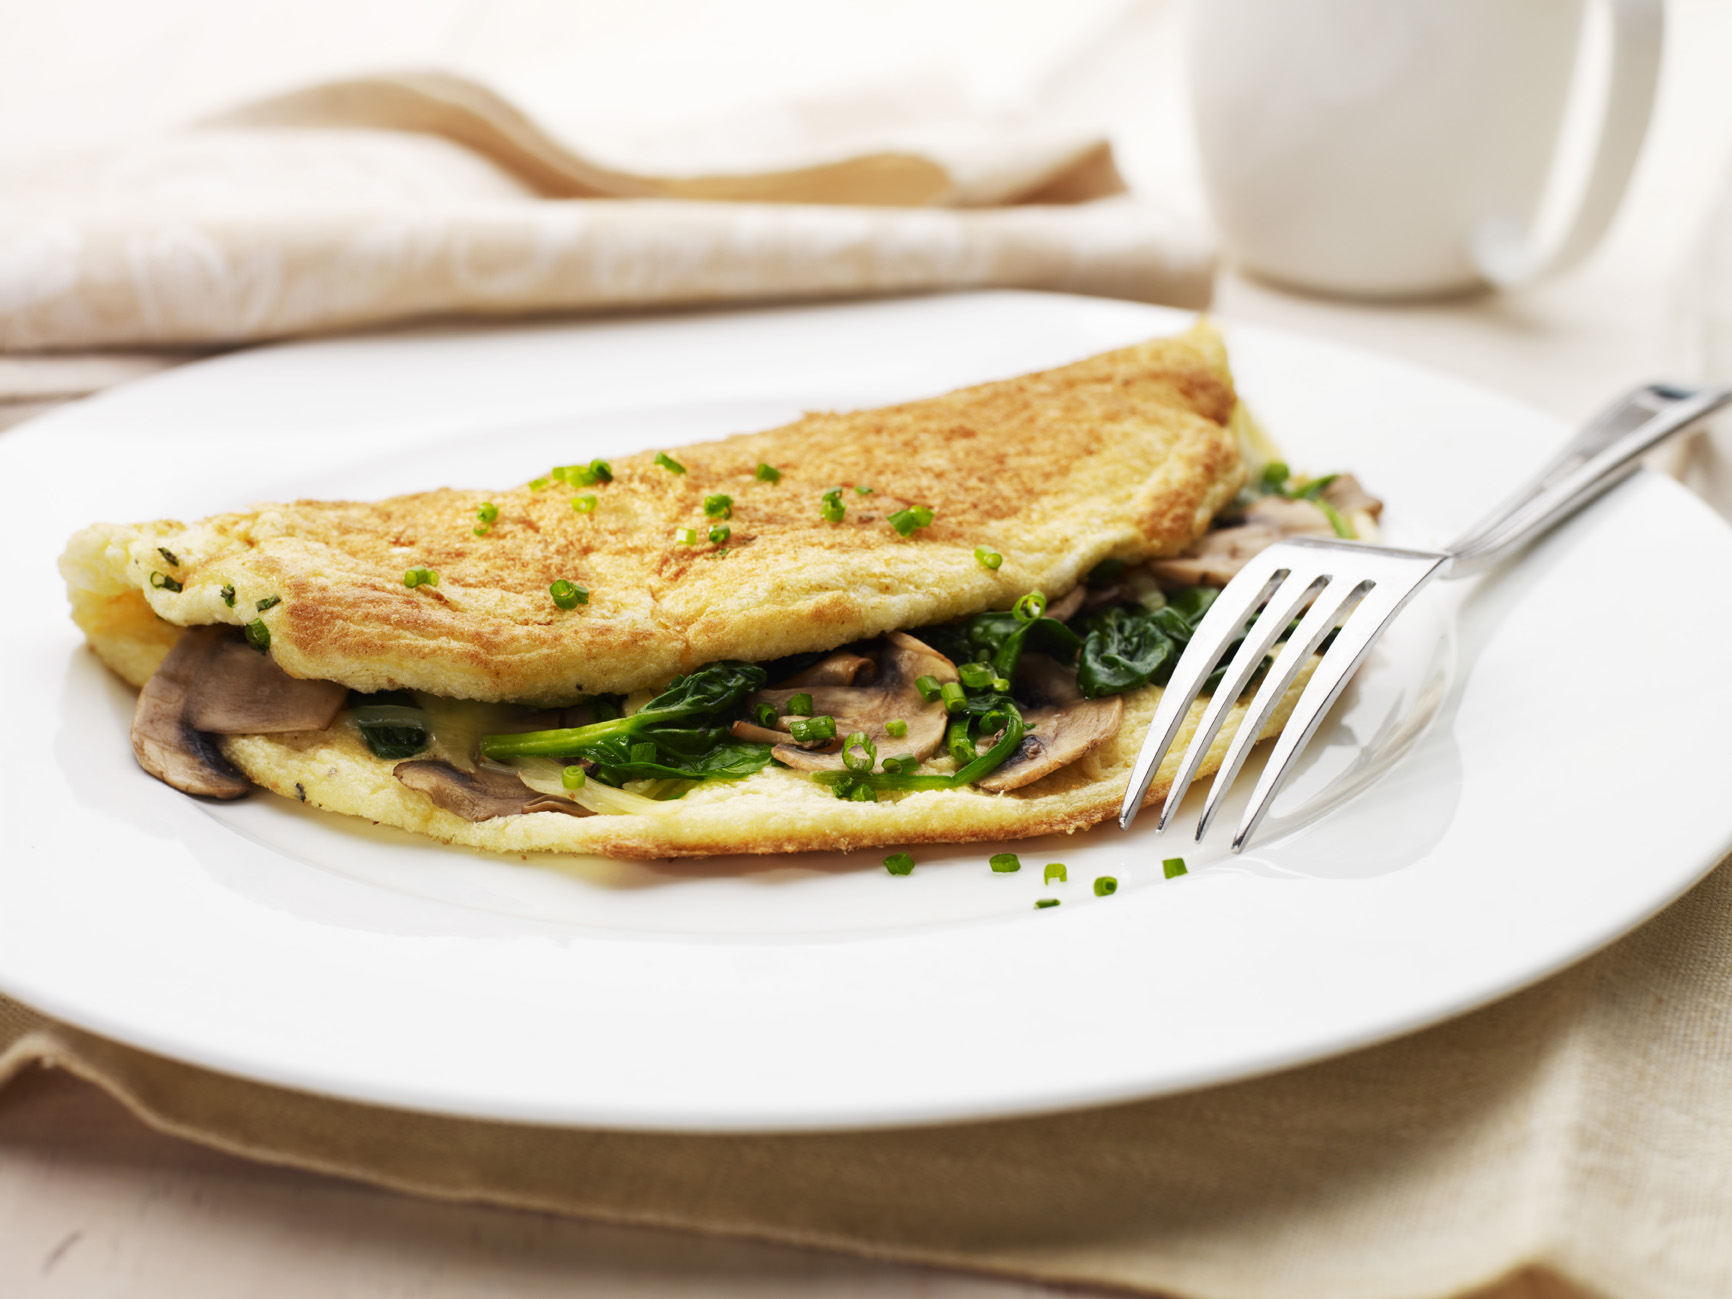 Fluffy spinach and mushroom omelette